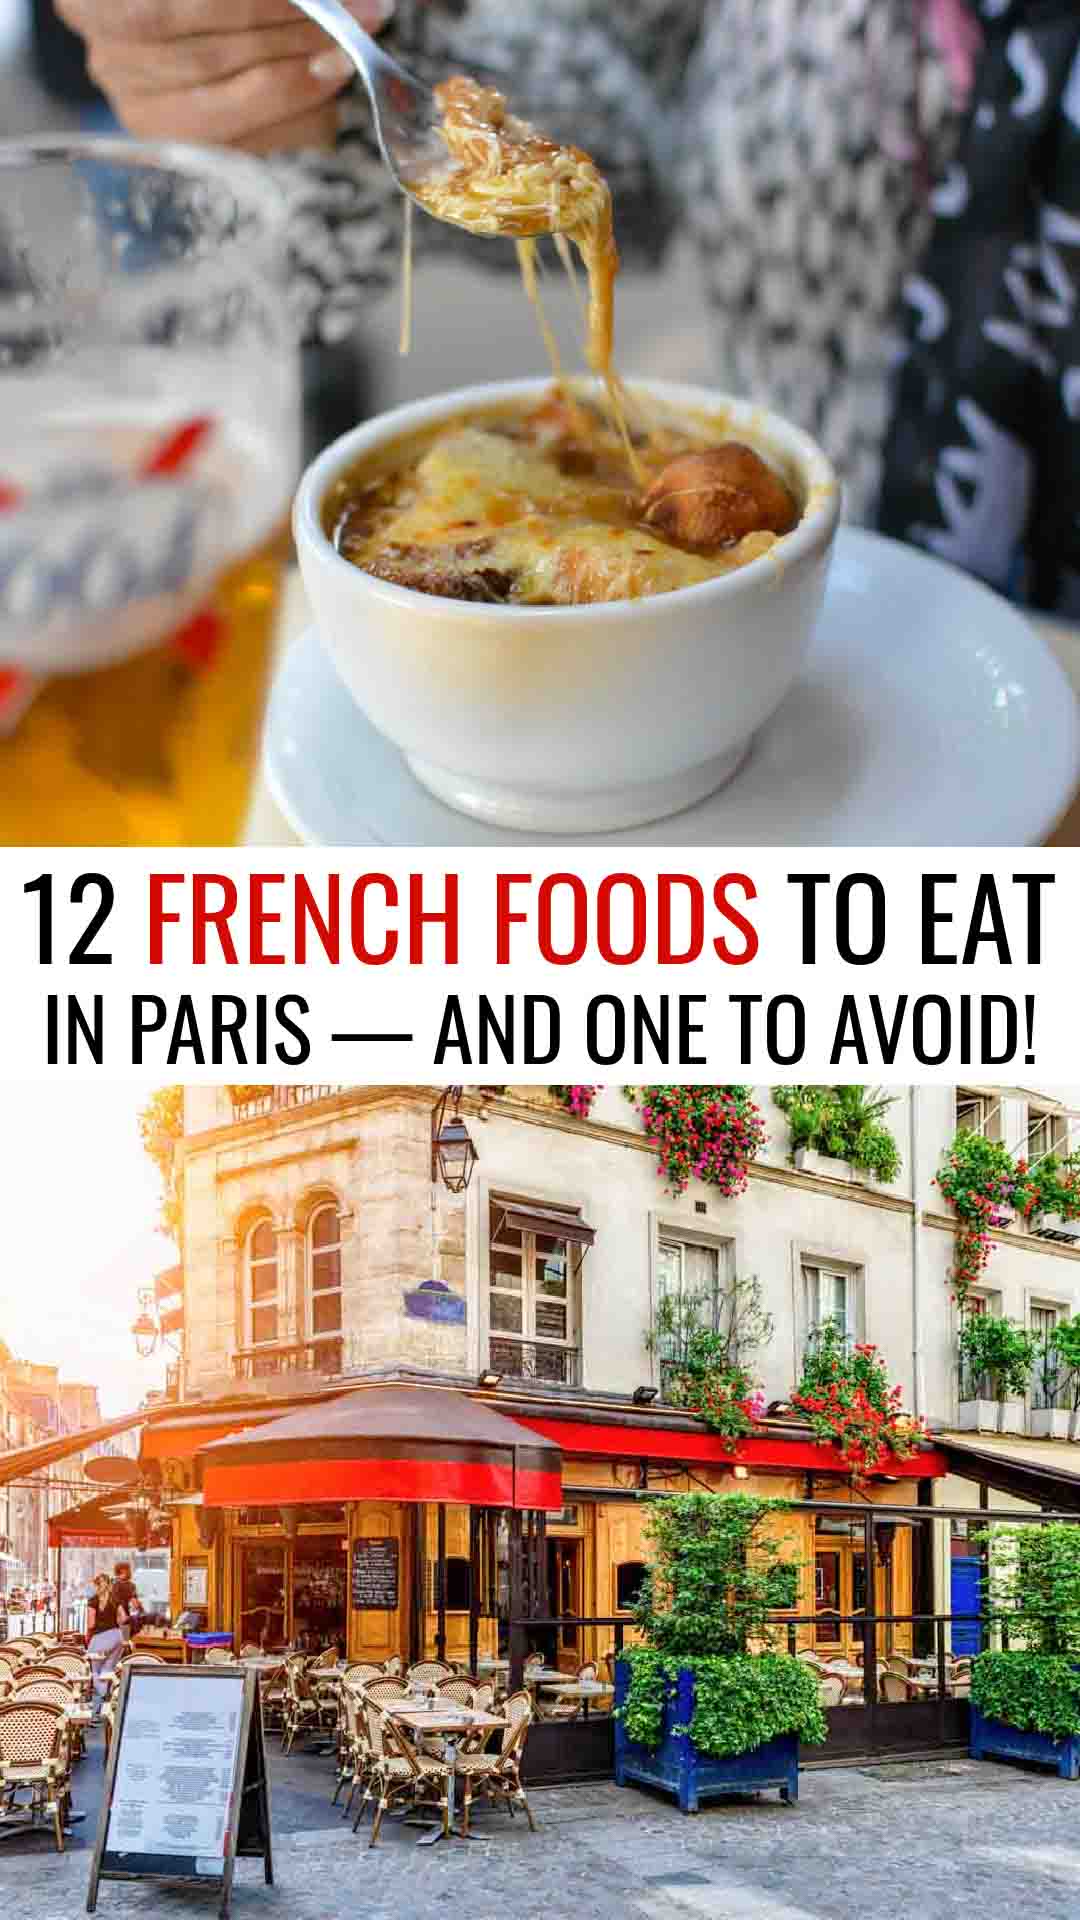 12 French Foods to Eat in Paris — and one to avoid! with photos of French Onion Soup and a Parisian restaurant